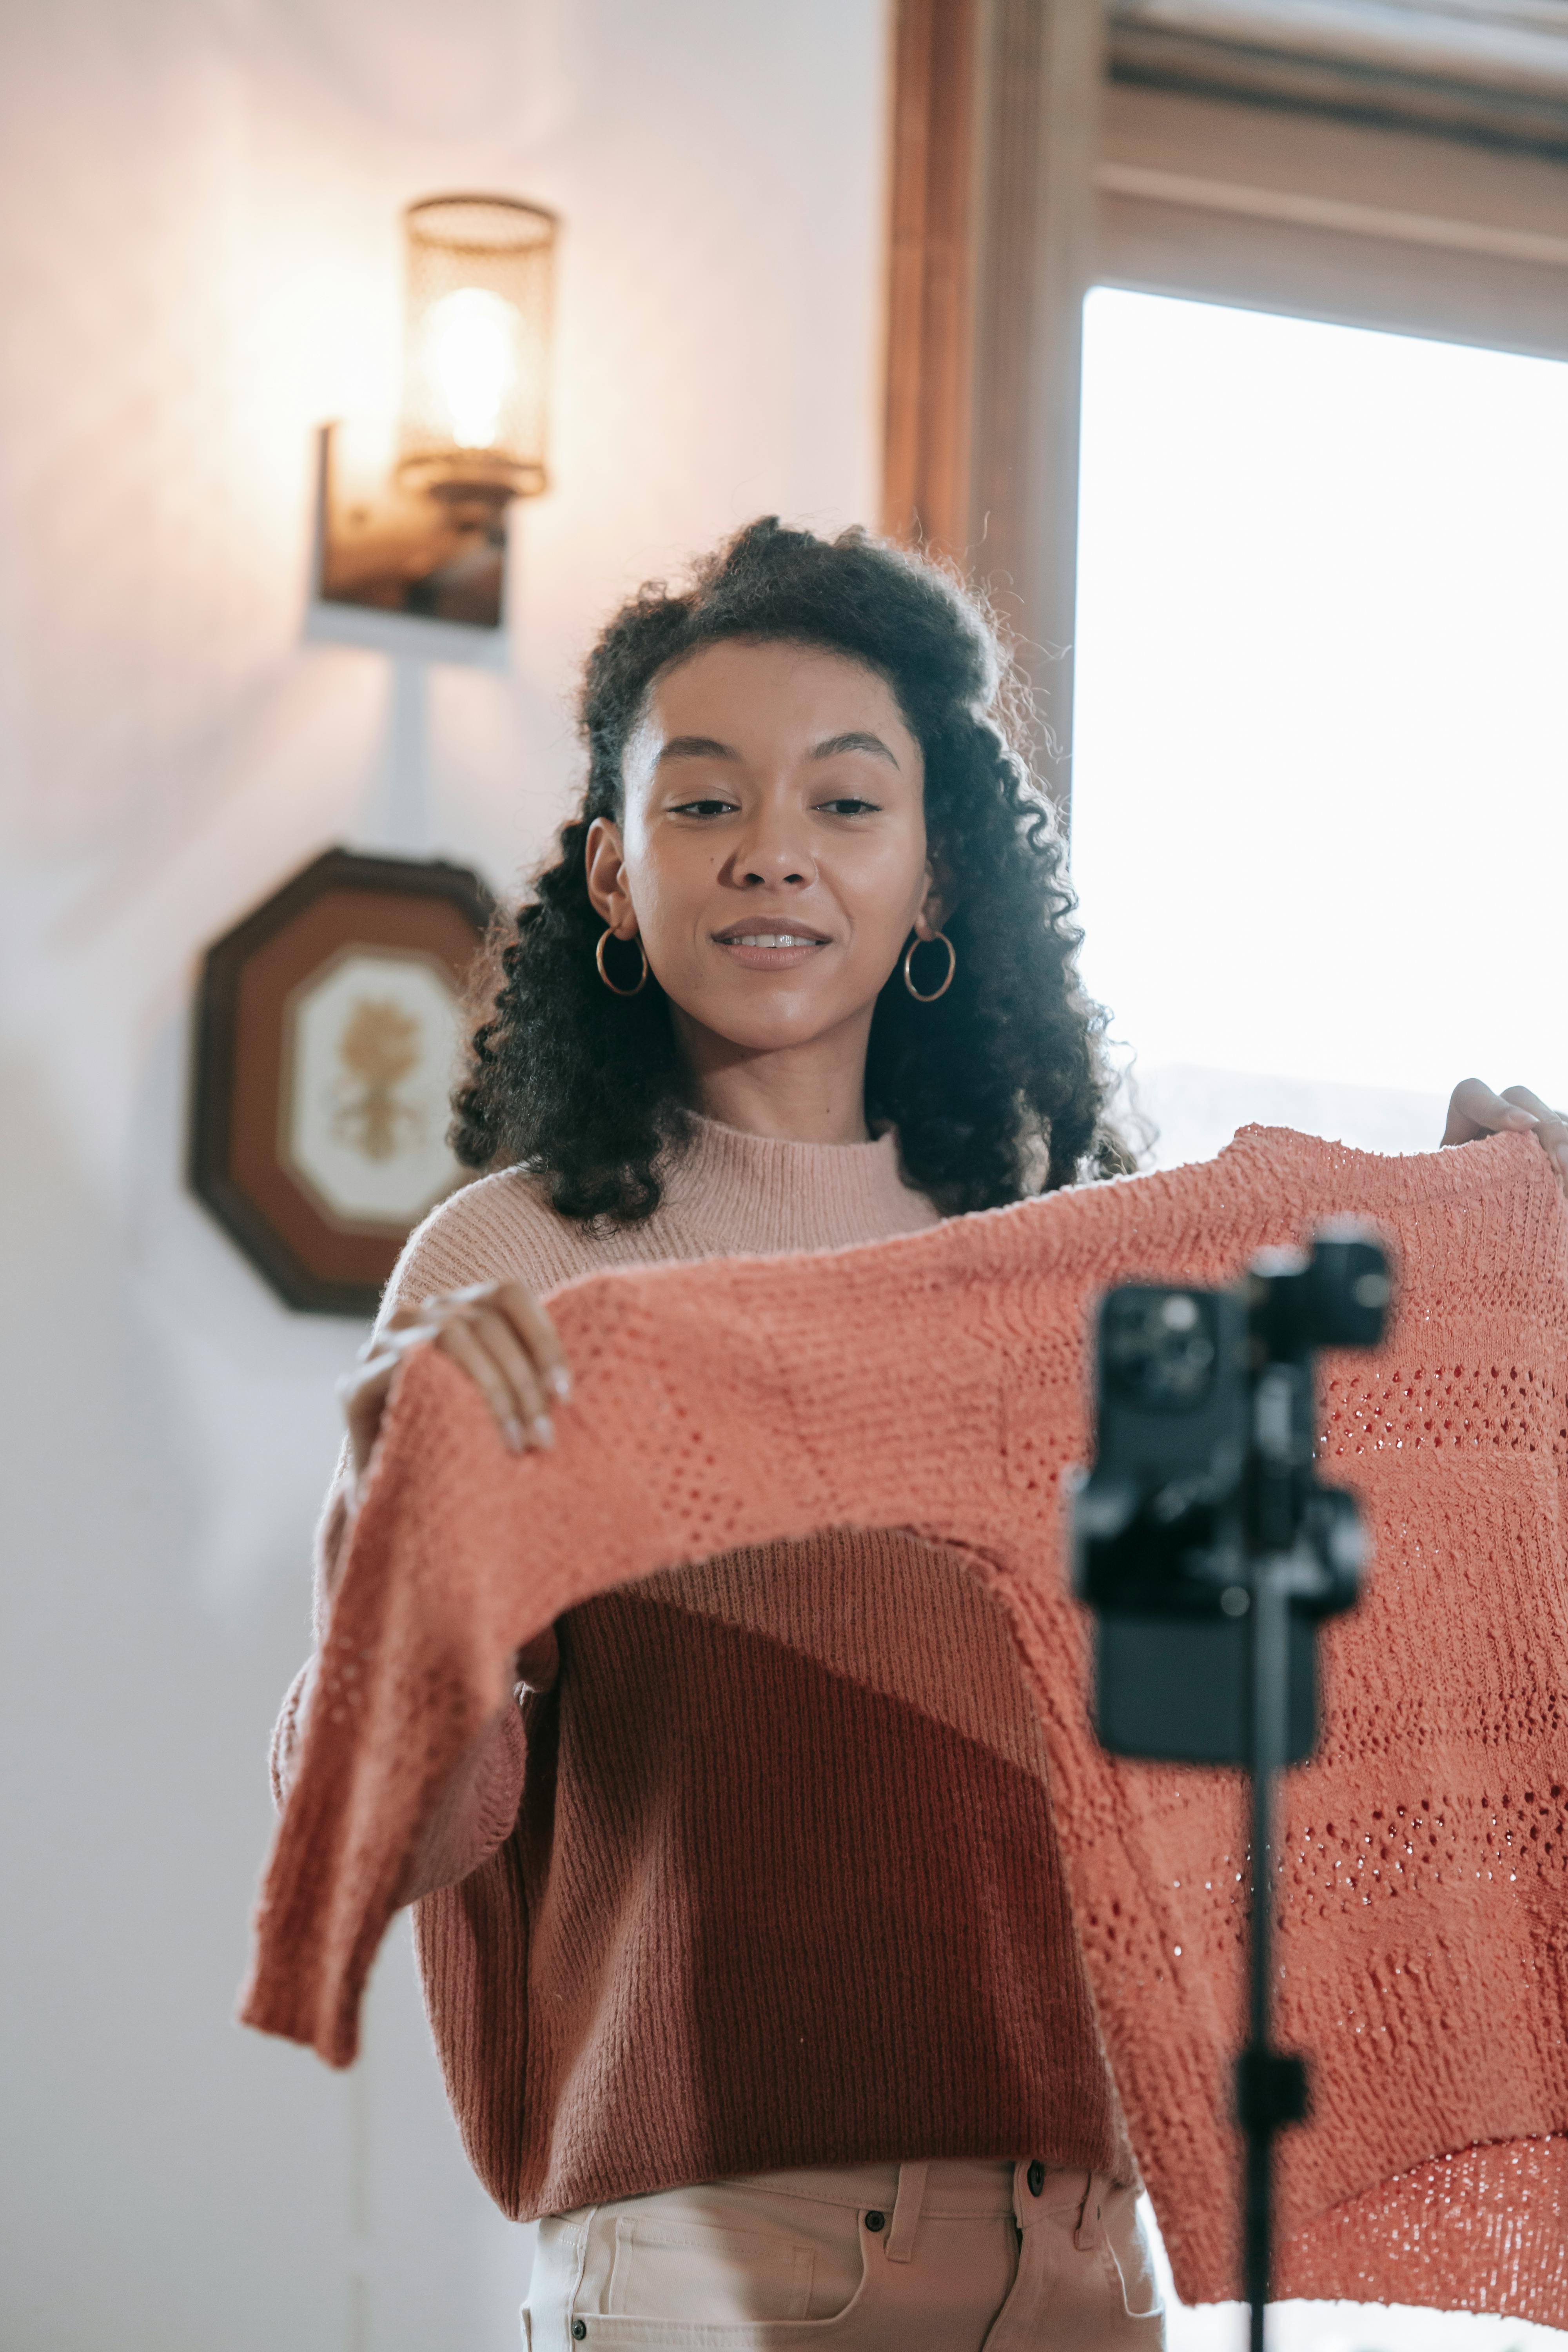 ethnic blogger showing sweater while recording video on smartphone